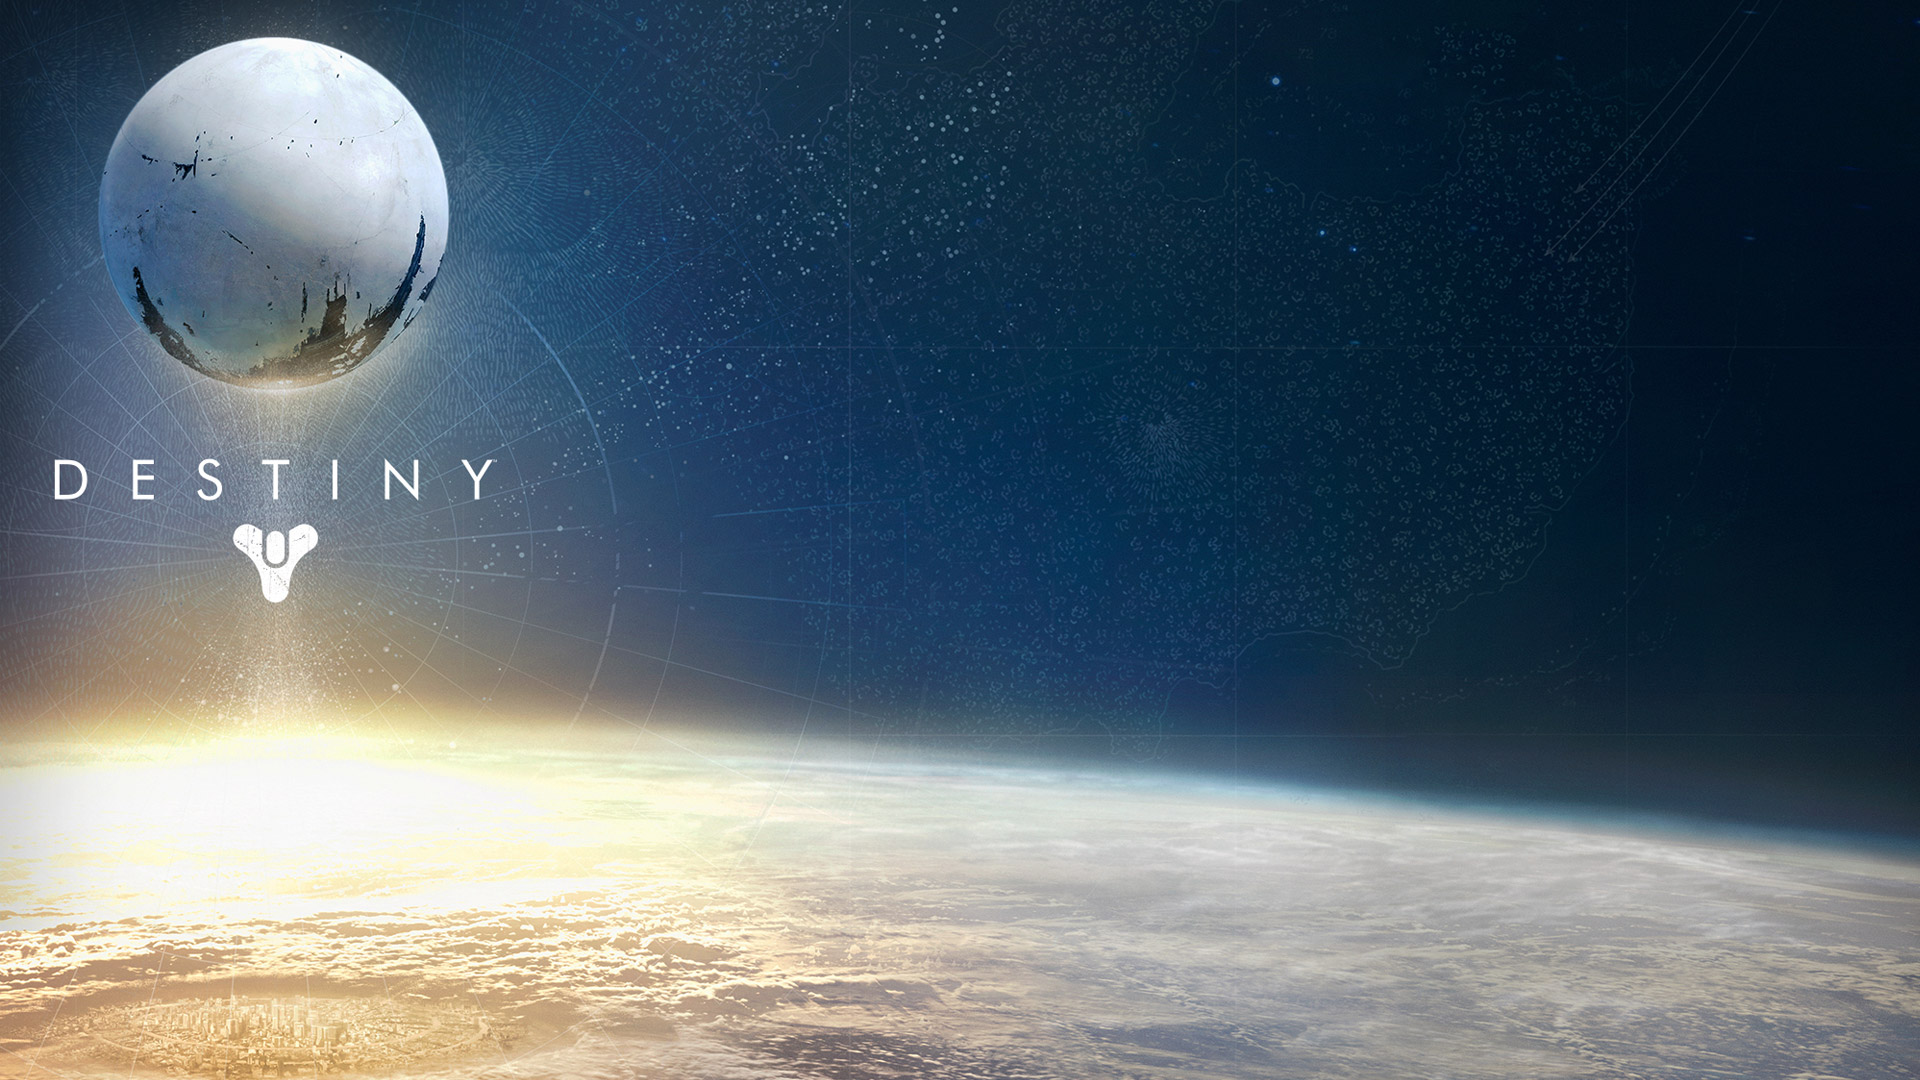 Destiny Games Wallpaper Destiny Games Wallpapers Res